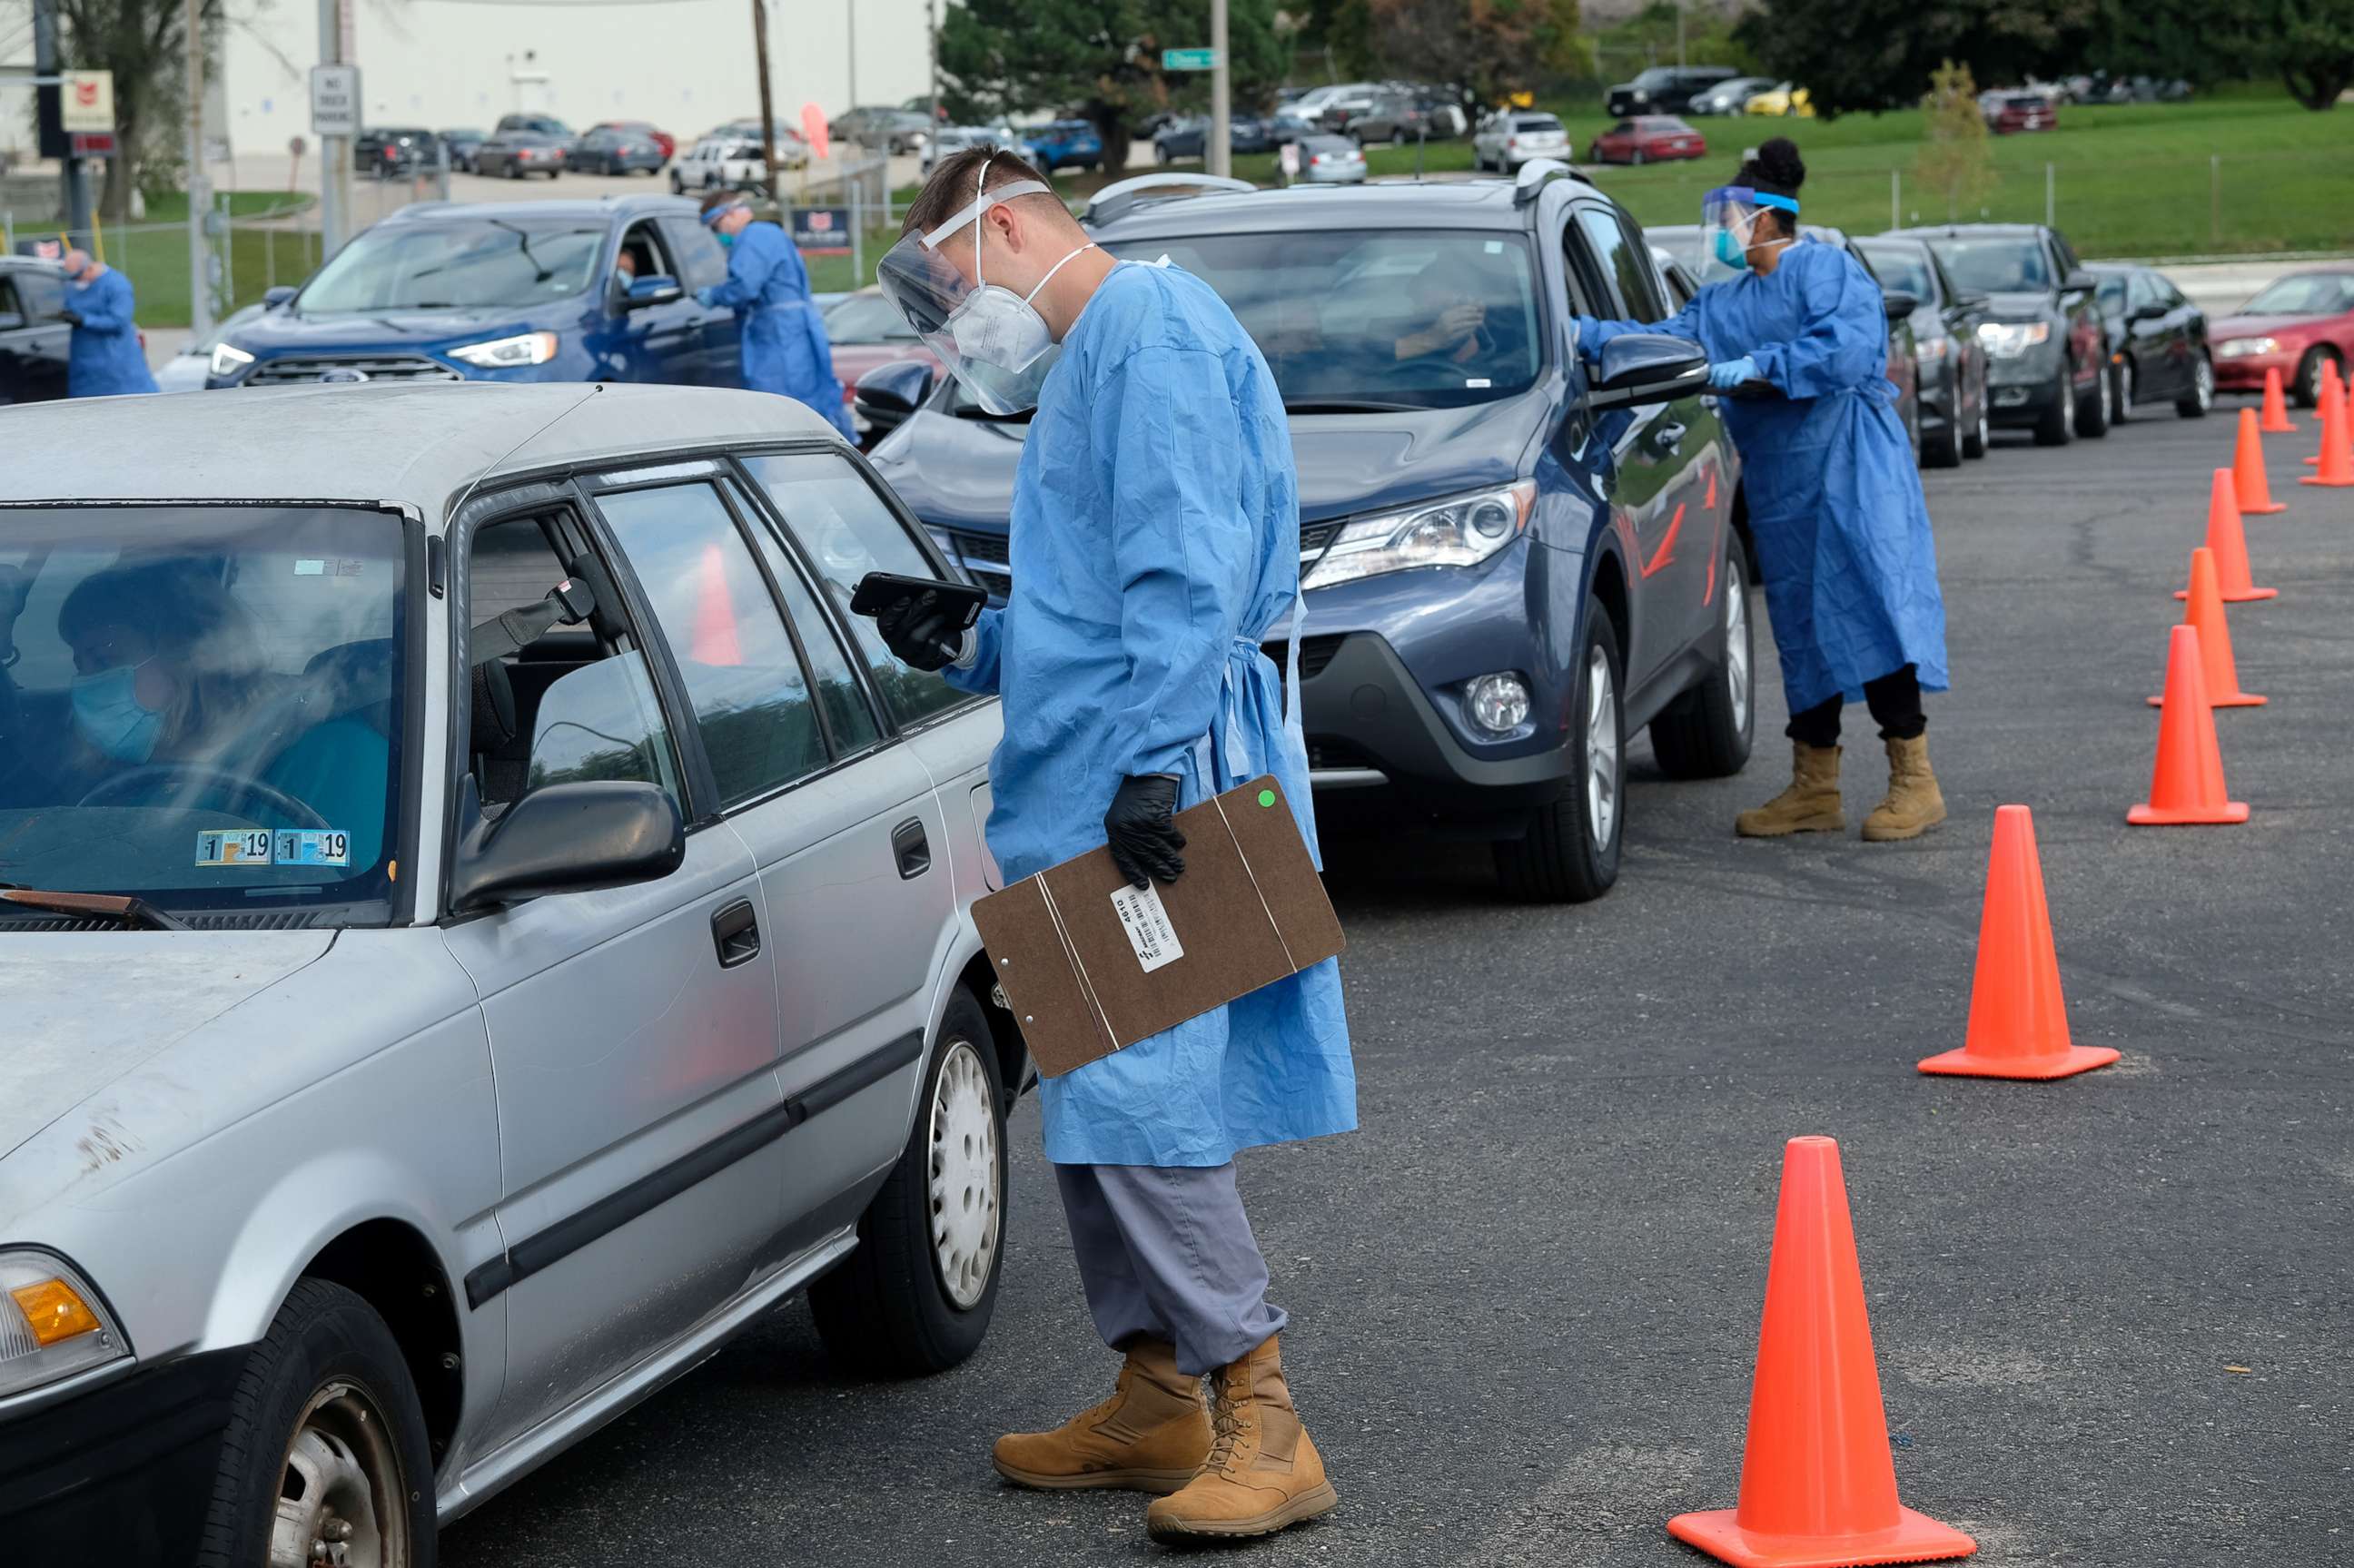 PHOTO: People line up in their vehicles to undergo the coronavirus disease tests, distributed by the Wisconsin National Guard at the United Migrant Opportunity Services center, in Milwaukee, Oct. 2, 2020.